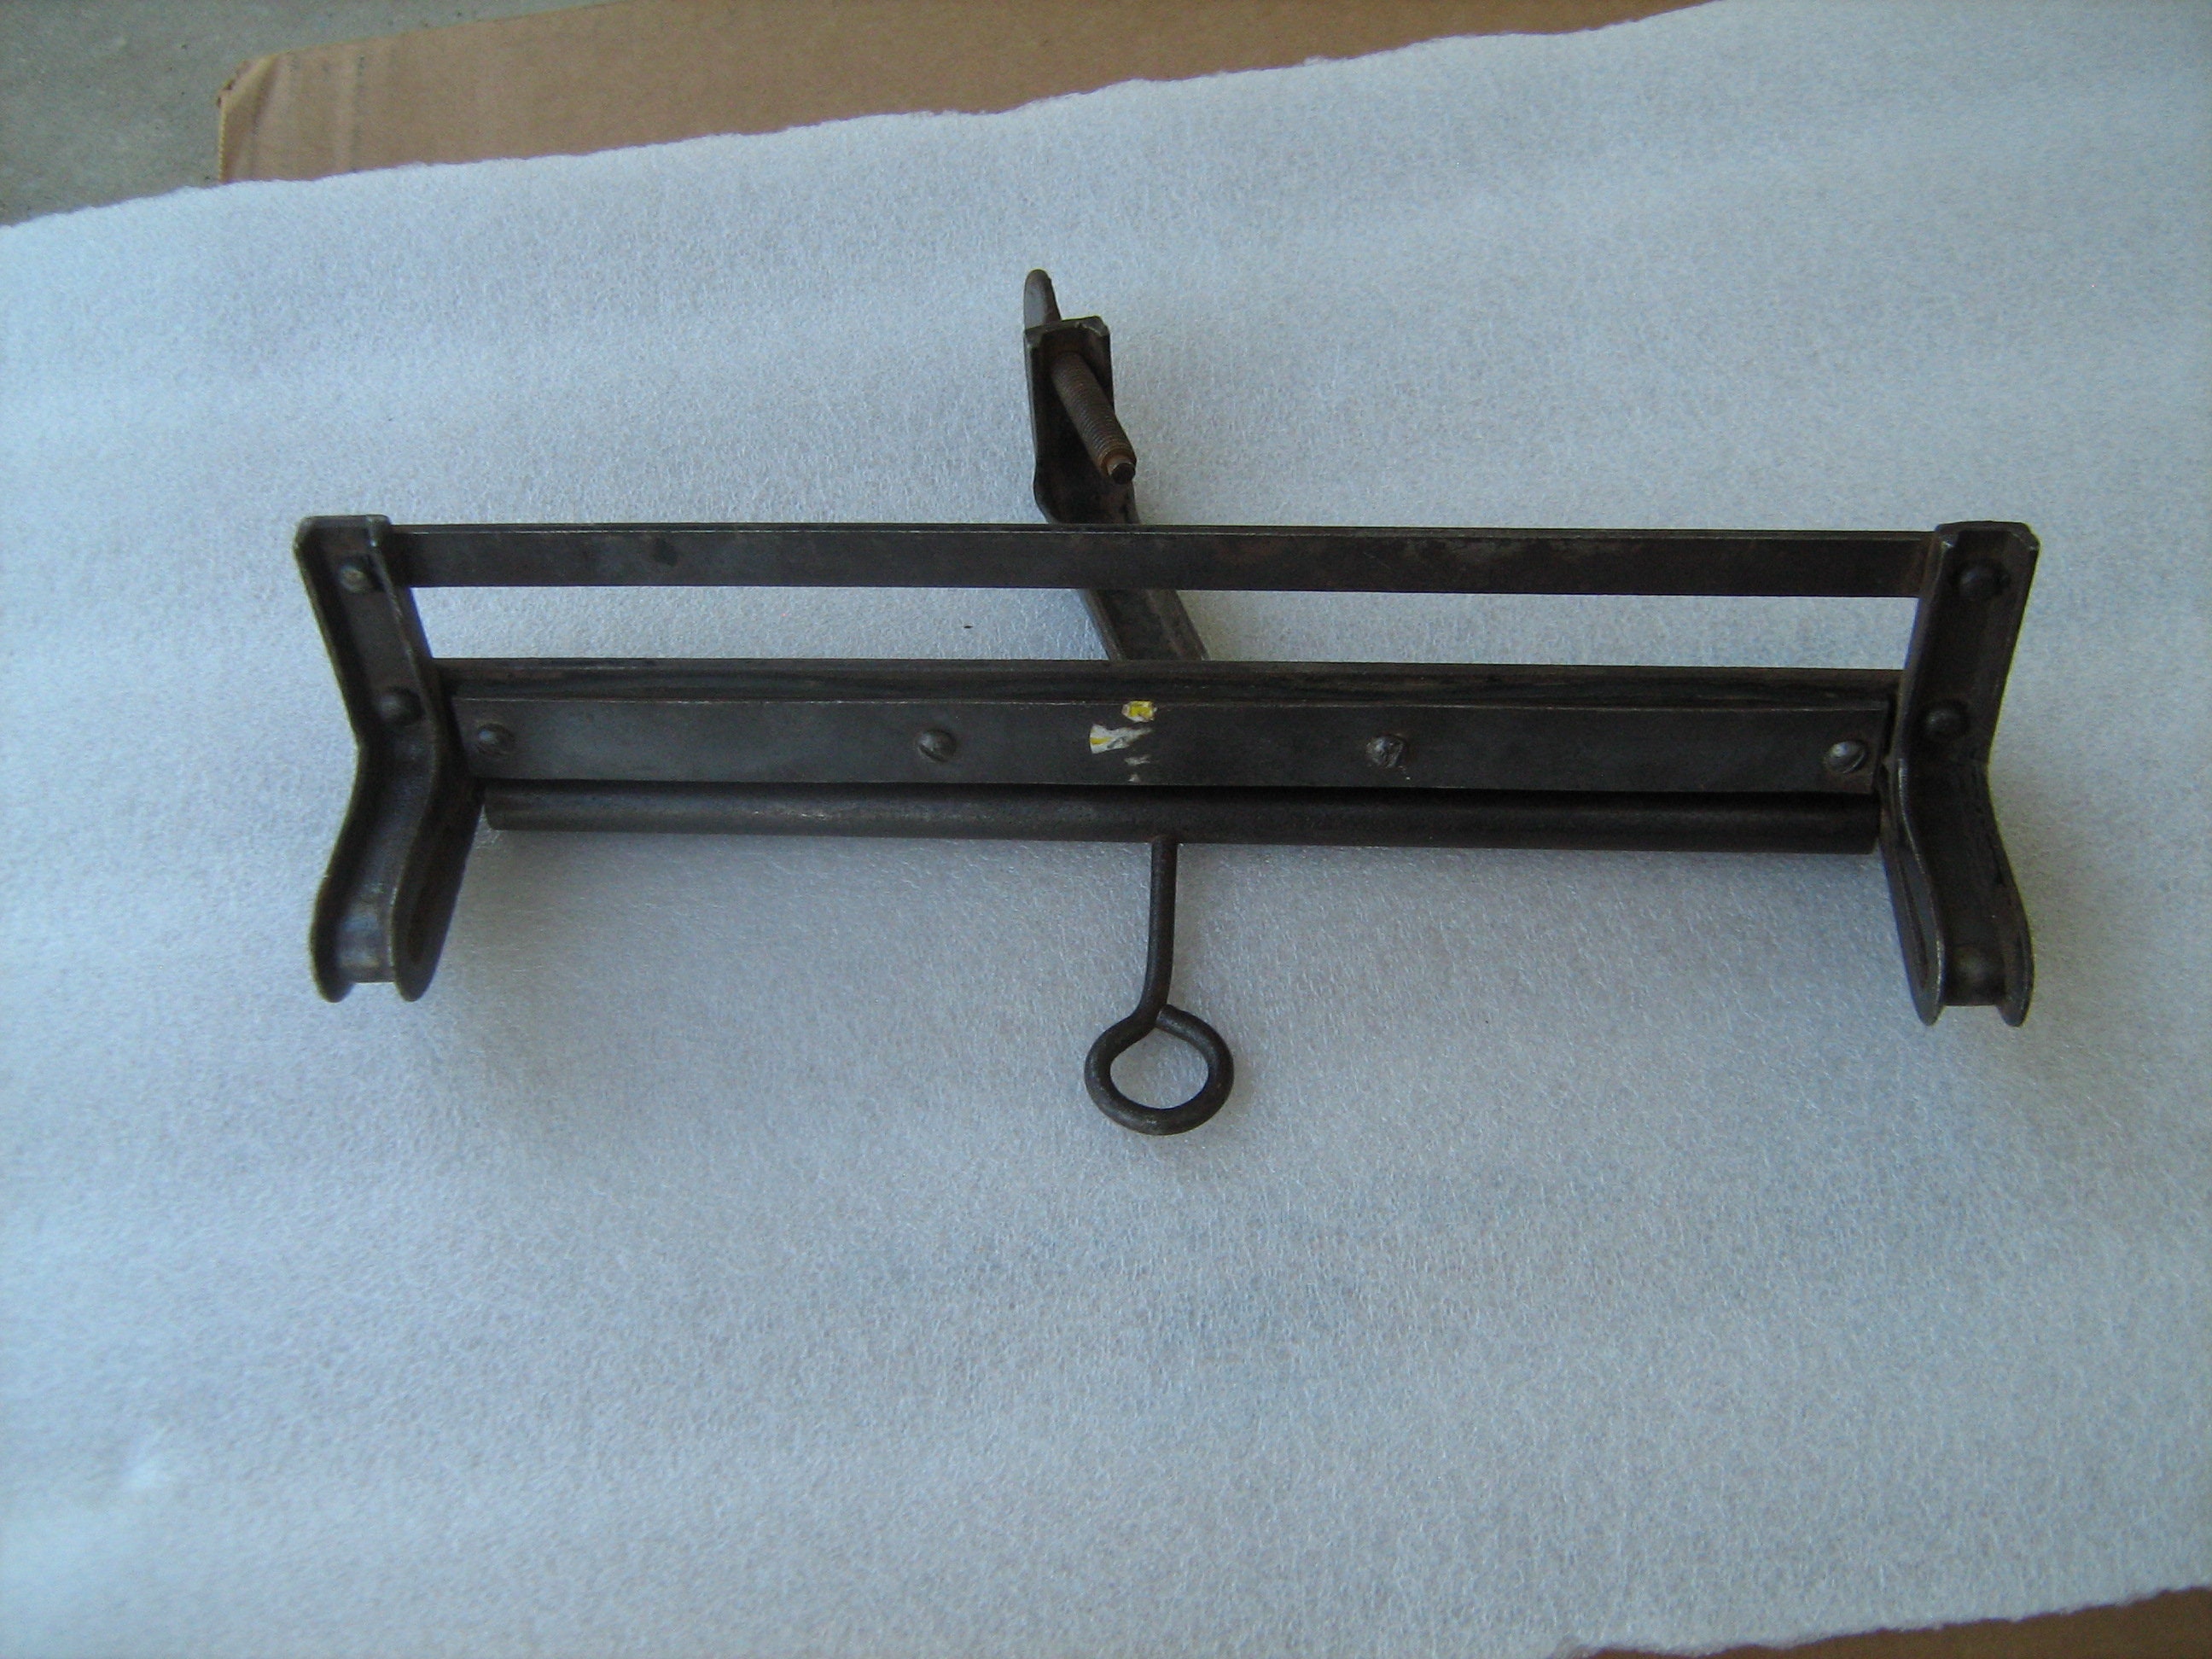 Vintage Antique Hand Saw Blade Sharpening Tool Clamp Unbranded Cast Iron